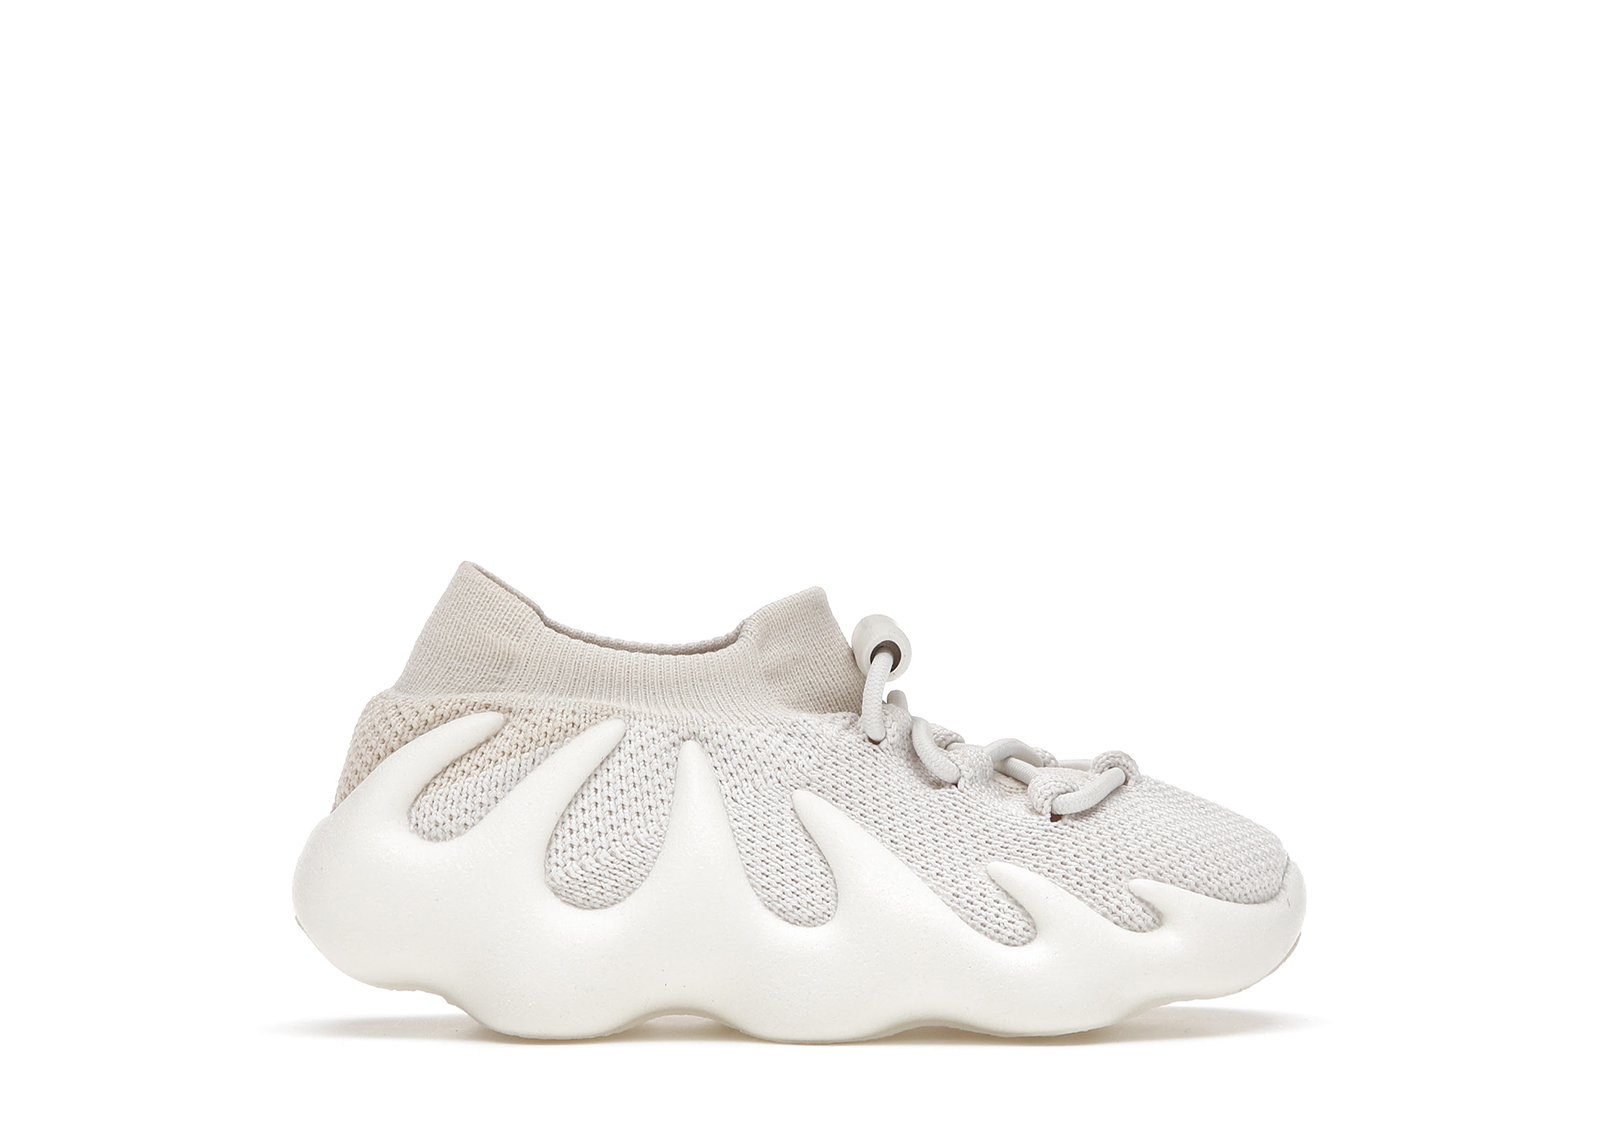 adidas Yeezy 450 Cloud White (Infant) sneakers